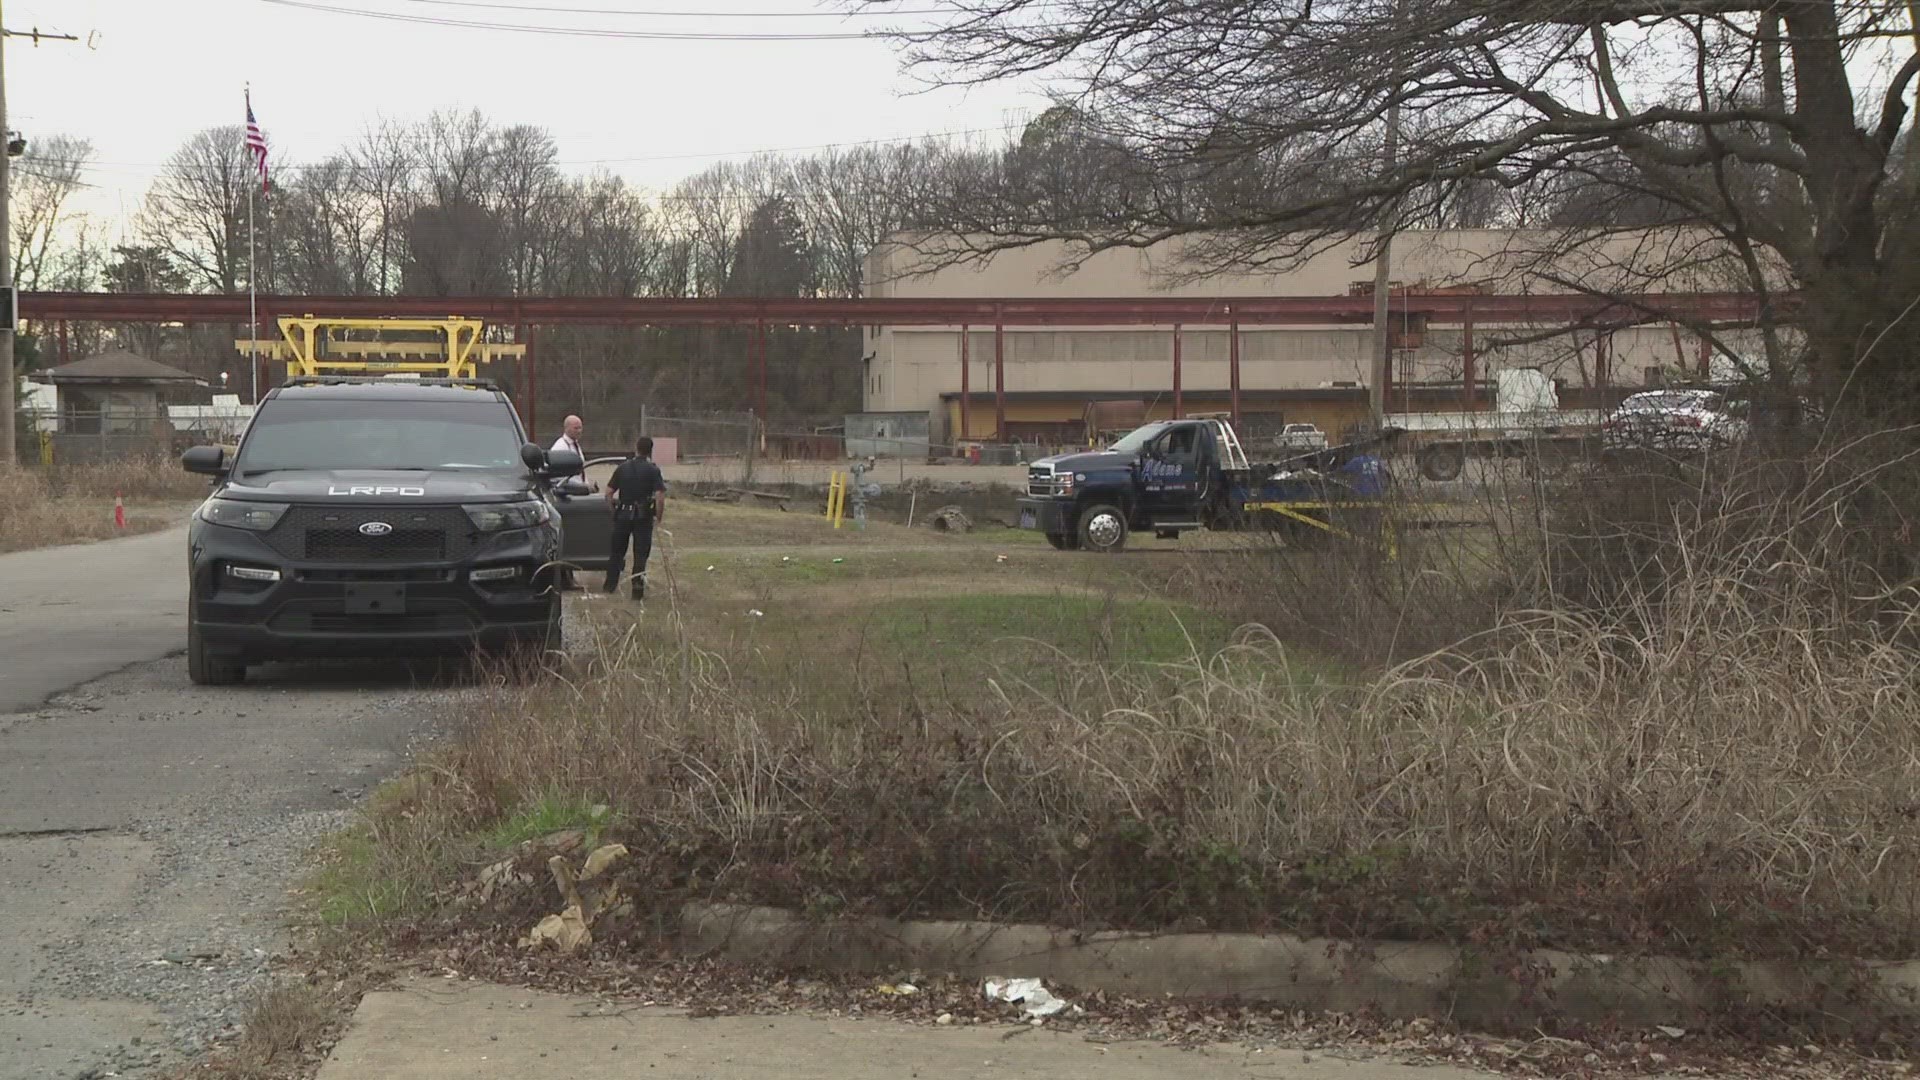 The Little Rock Police Department arrested a 26-year-old man after finding a dead body inside a vehicle in the 2100 block of Security Avenue on Feb. 1.